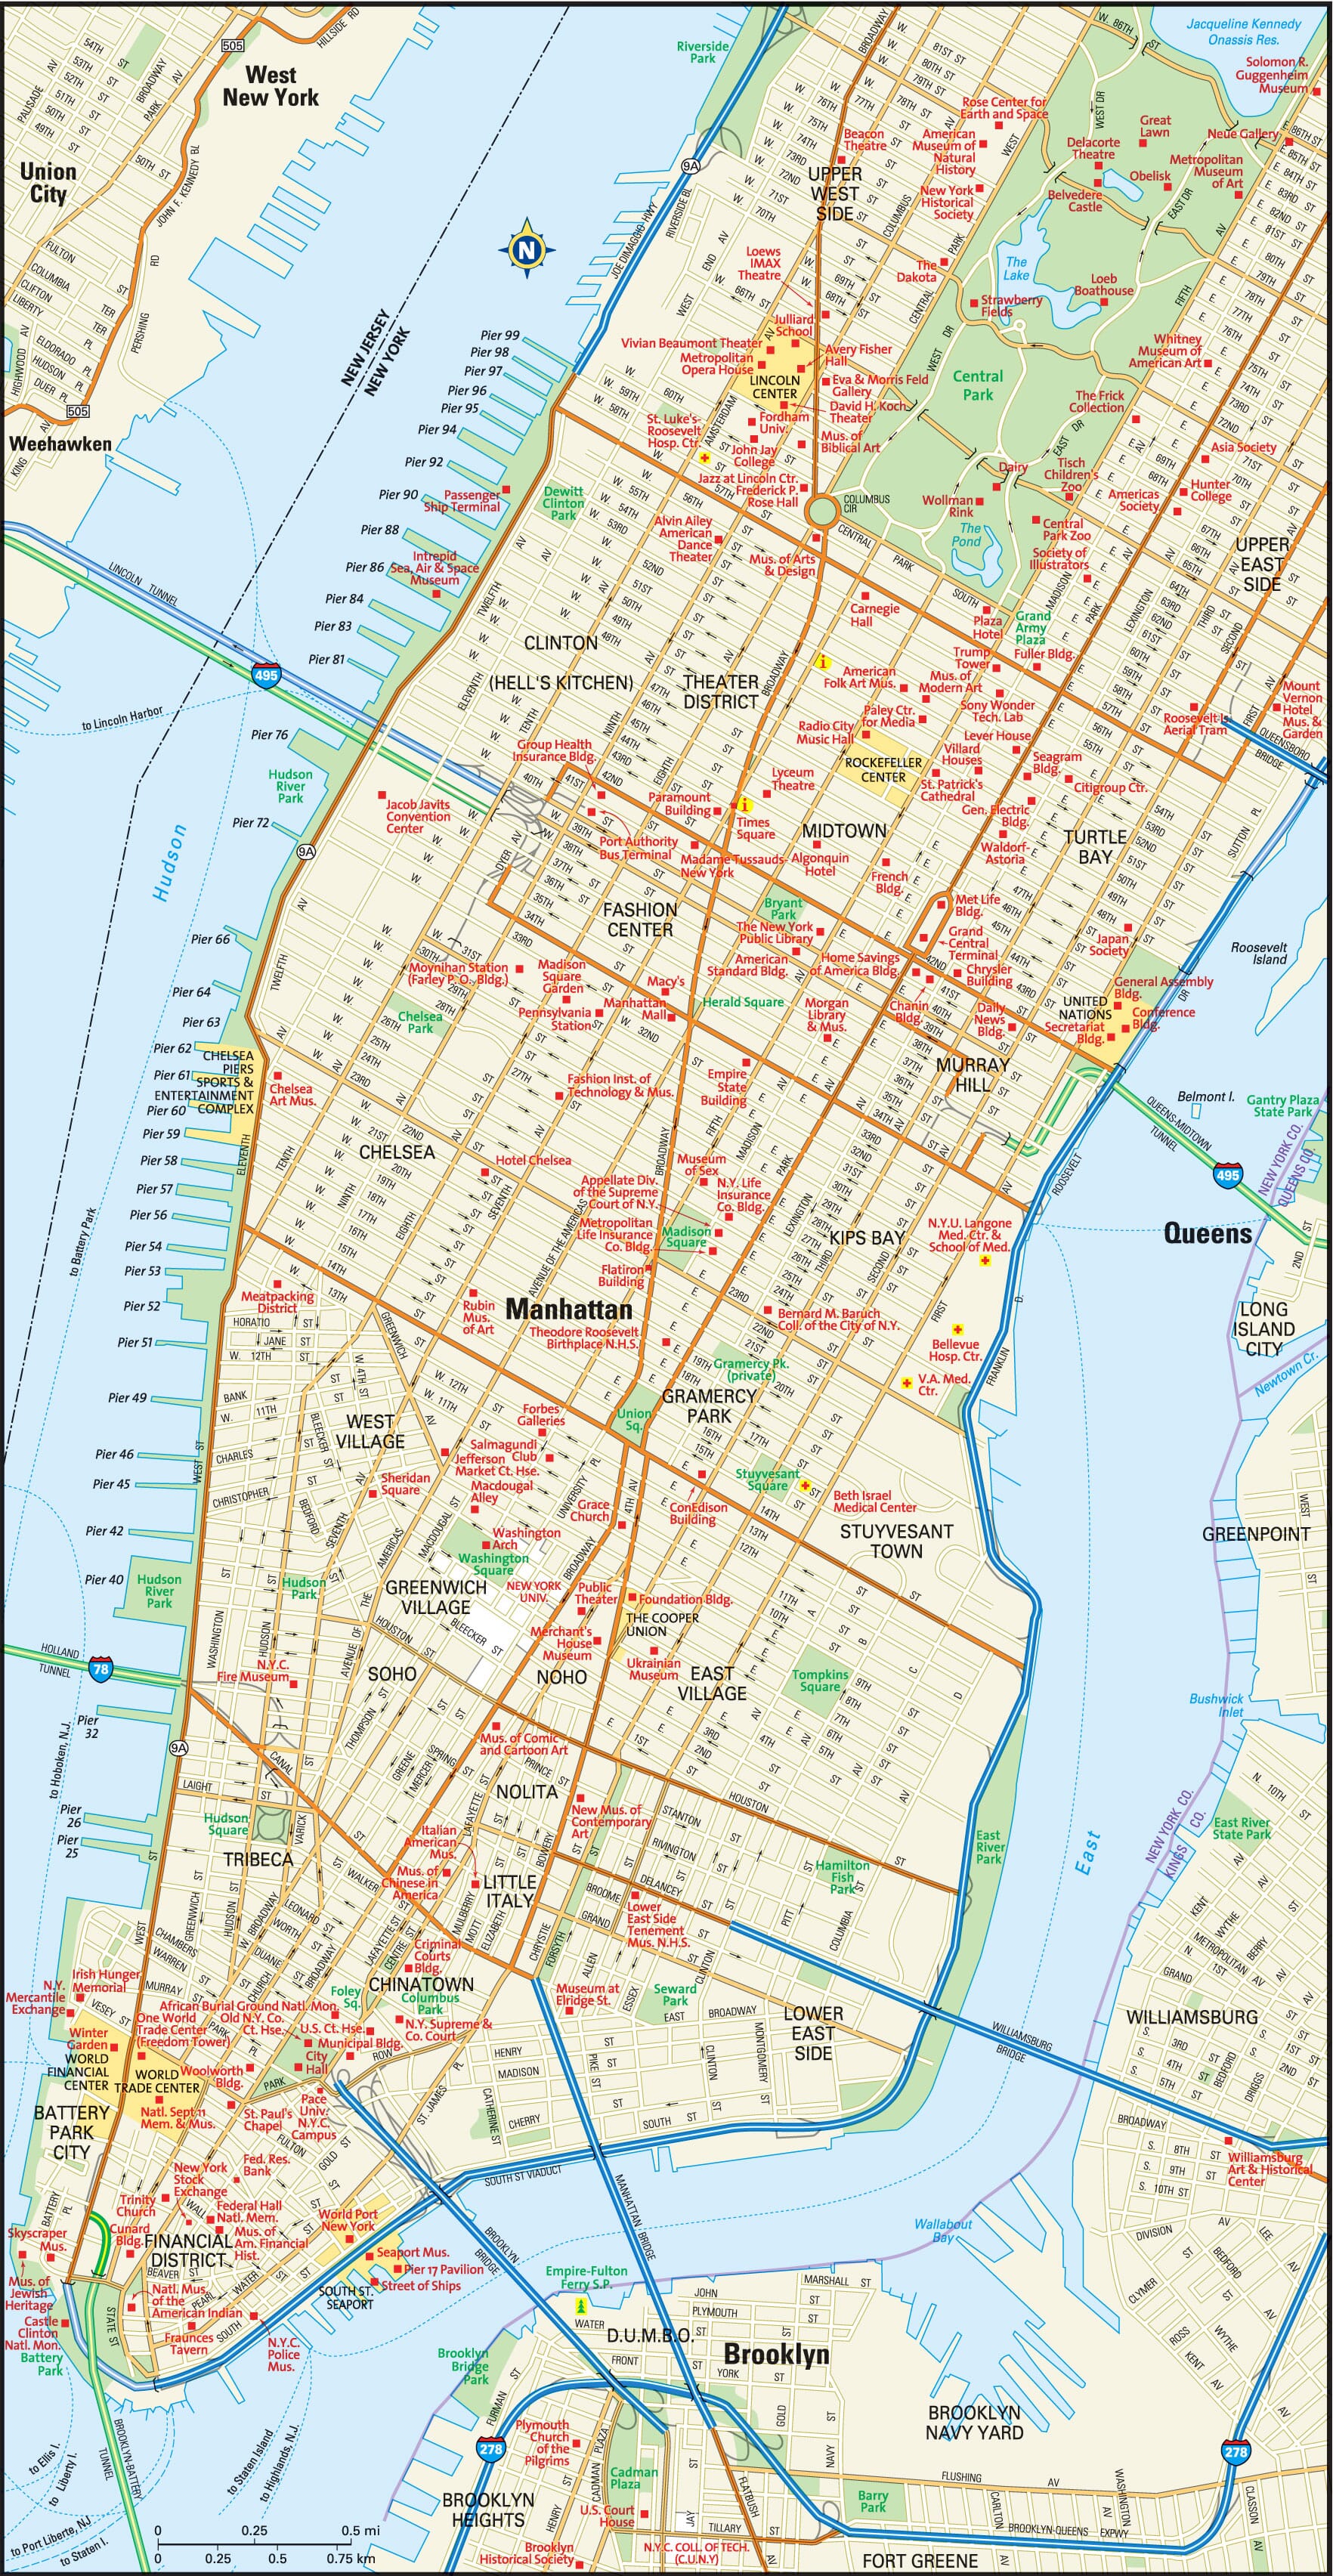 new york city is located in the southeastern part of new york state just east of new jersey